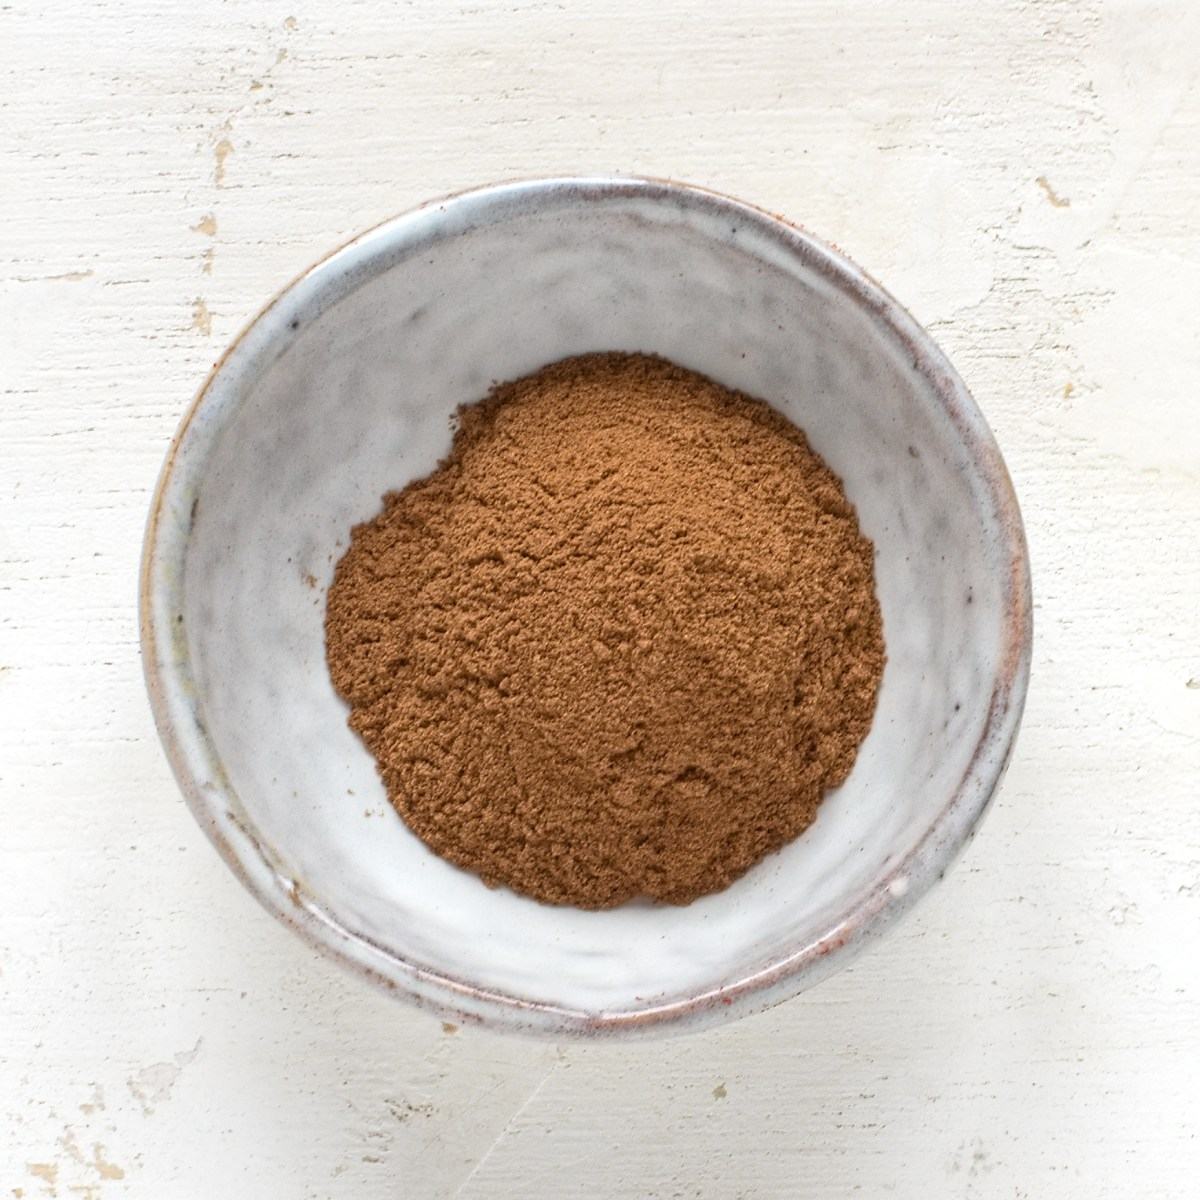 Ground cinnamon in a small grey bowl.